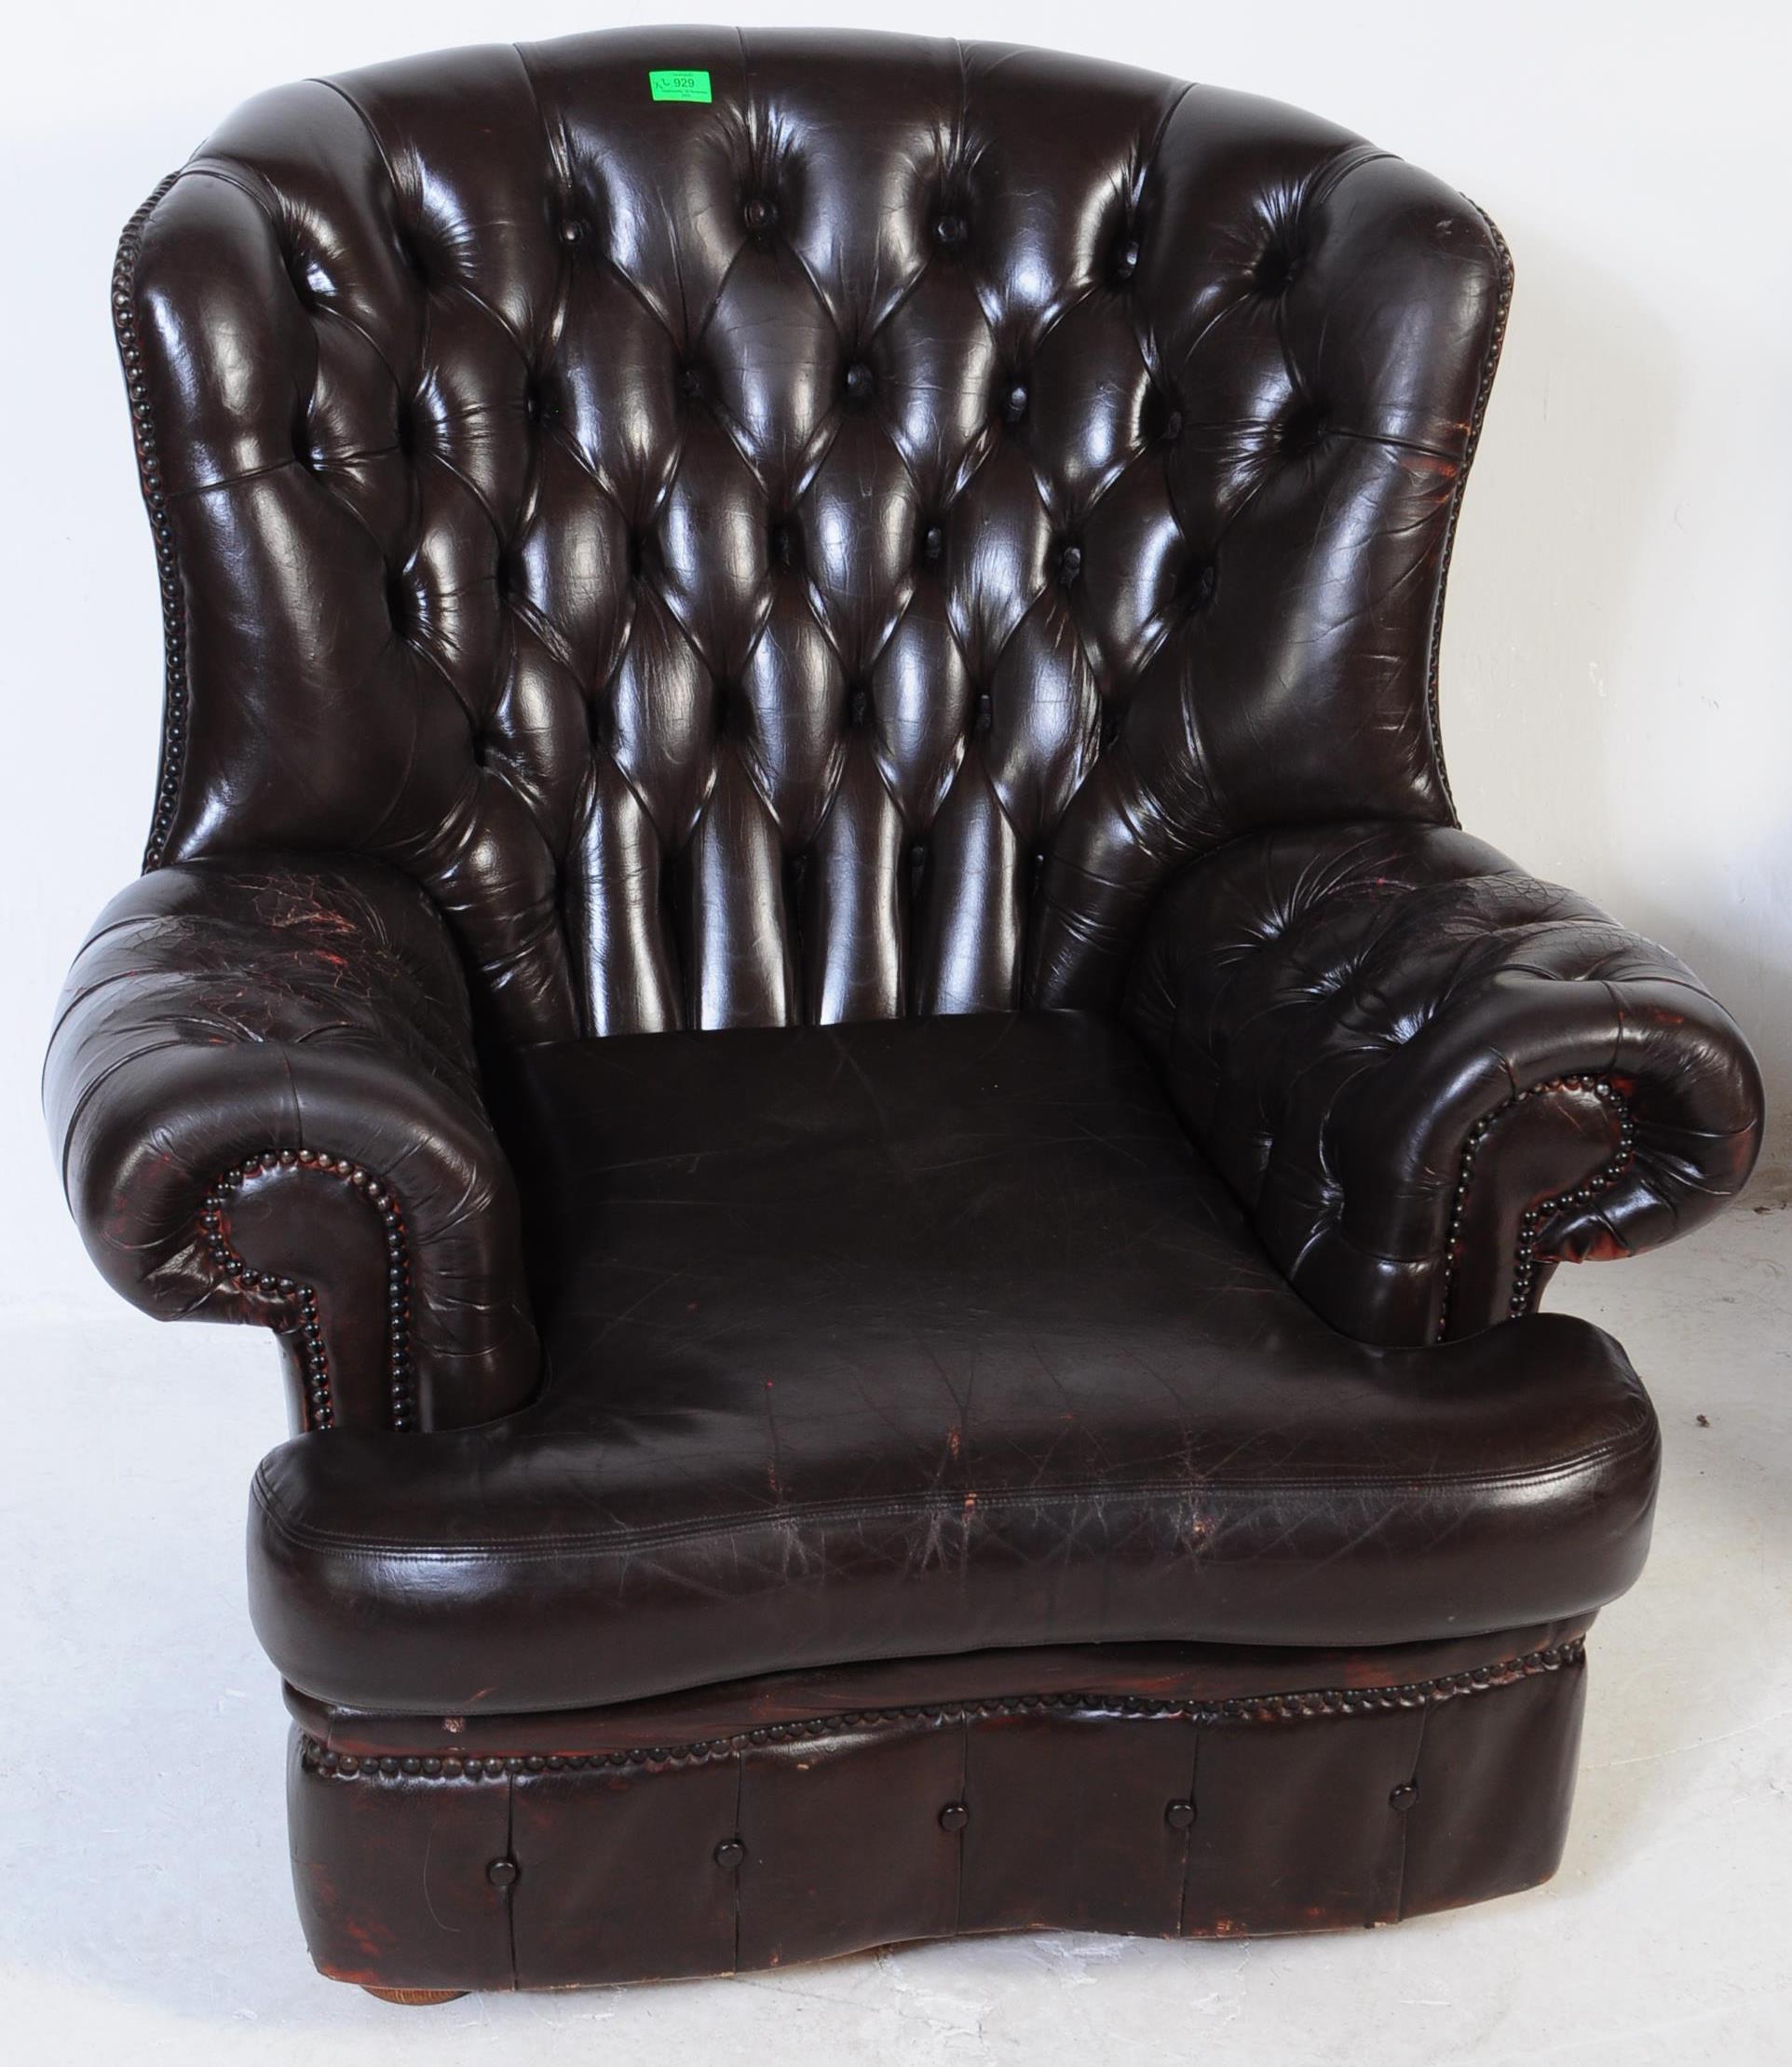 PAIR OF 20TH CENTURY CHESTERFIELD STYEL BROWN ARMCHAIRS - Image 2 of 6